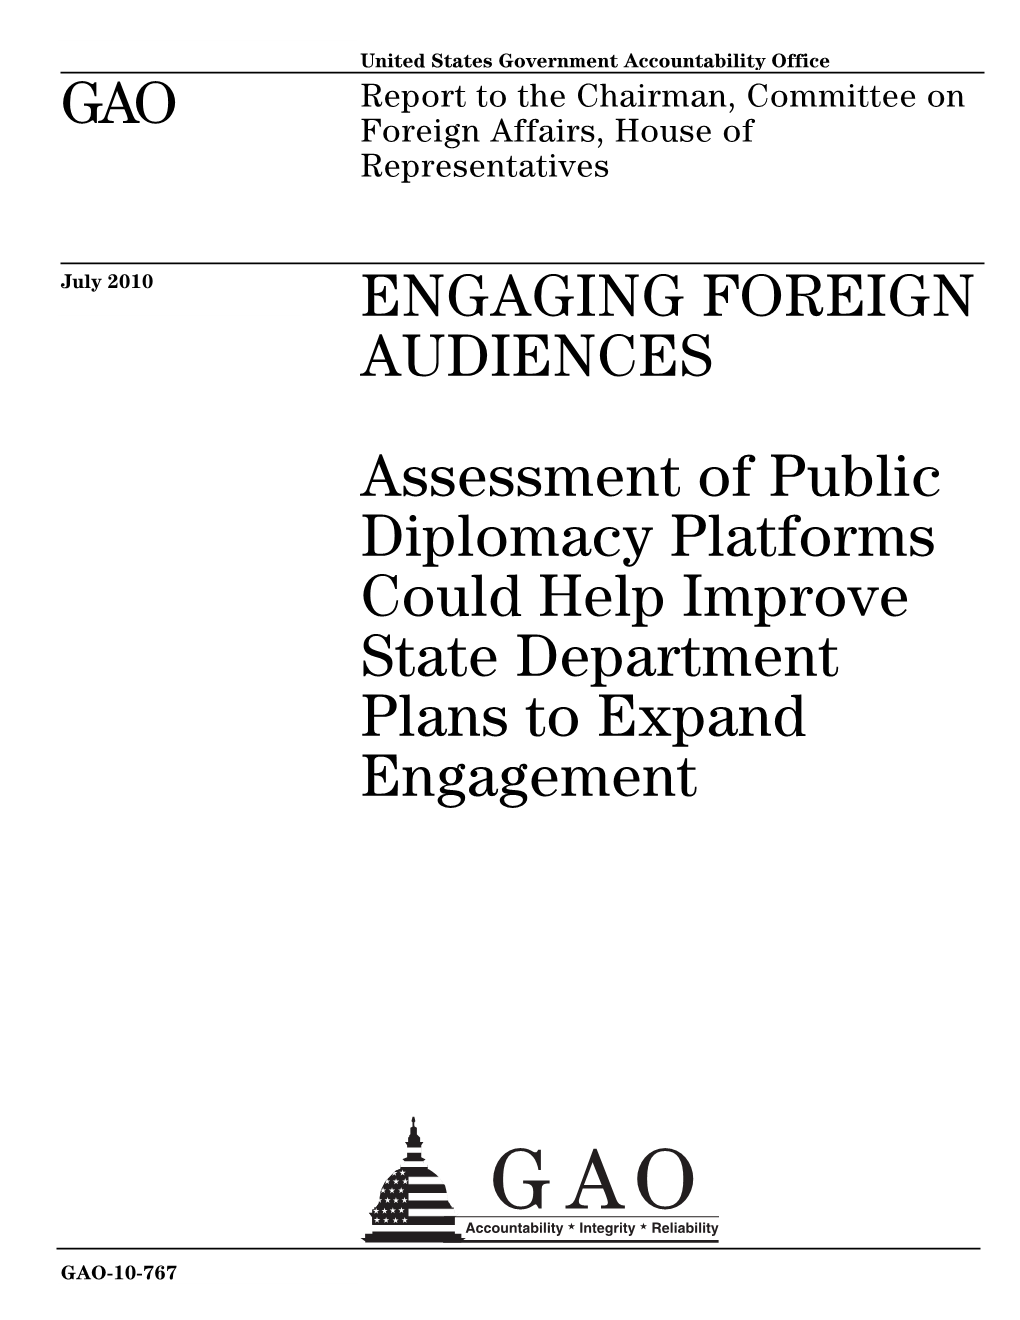 Assessment of Public Diplomacy Platforms Could Help Improve State Department Plans to Expand Engagement